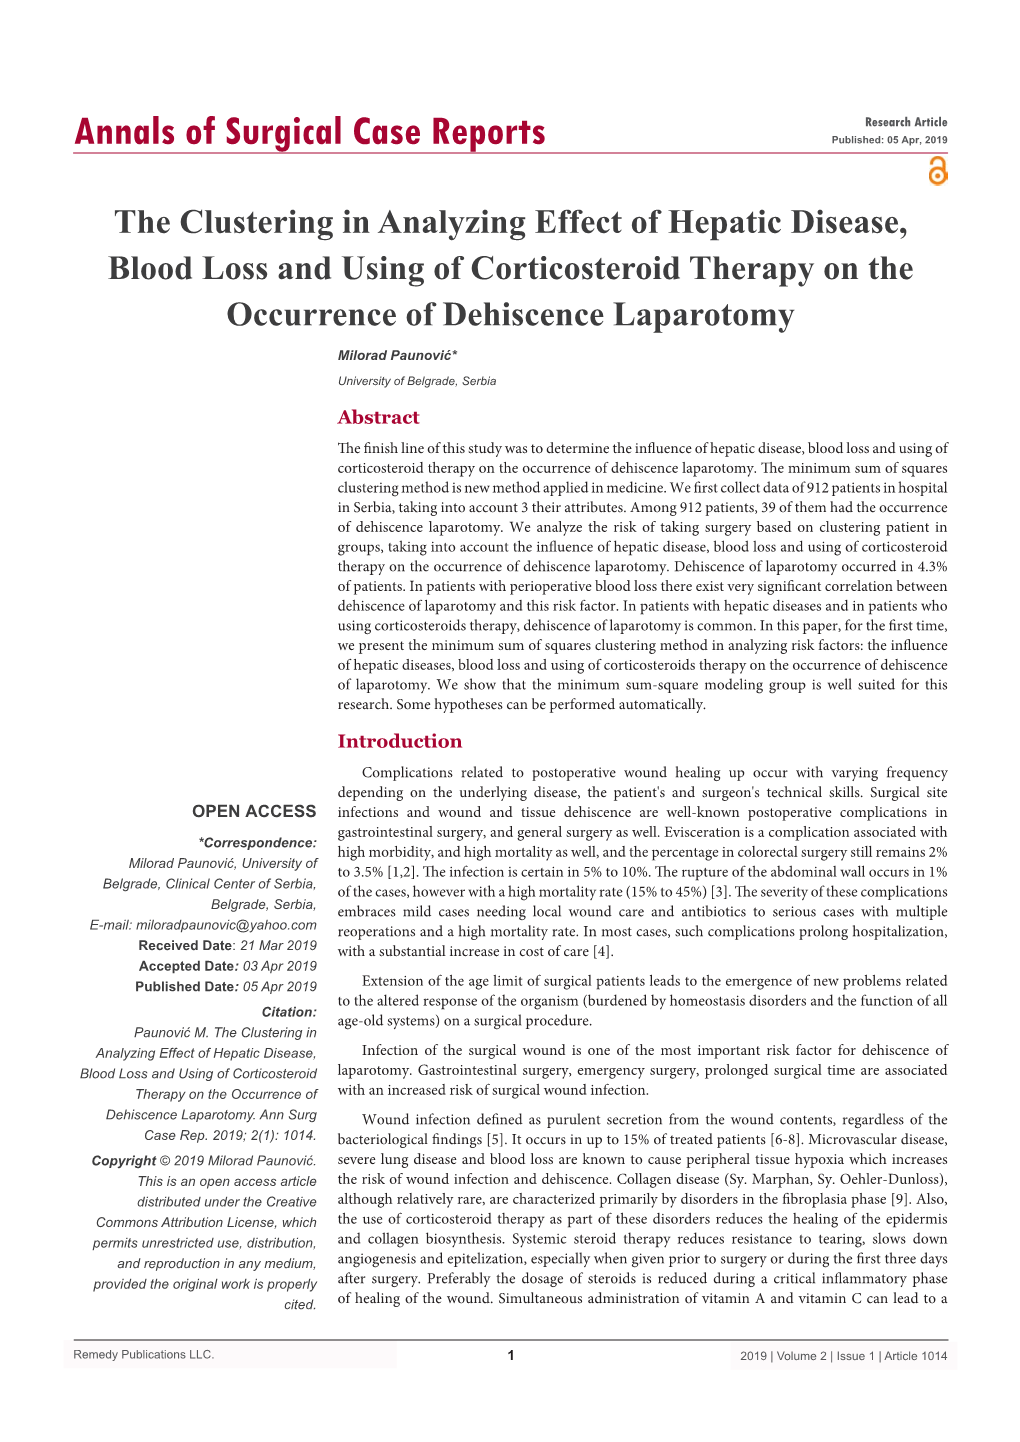 The Clustering in Analyzing Effect of Hepatic Disease, Blood Loss and Using of Corticosteroid Therapy on the Occurrence of Dehiscence Laparotomy